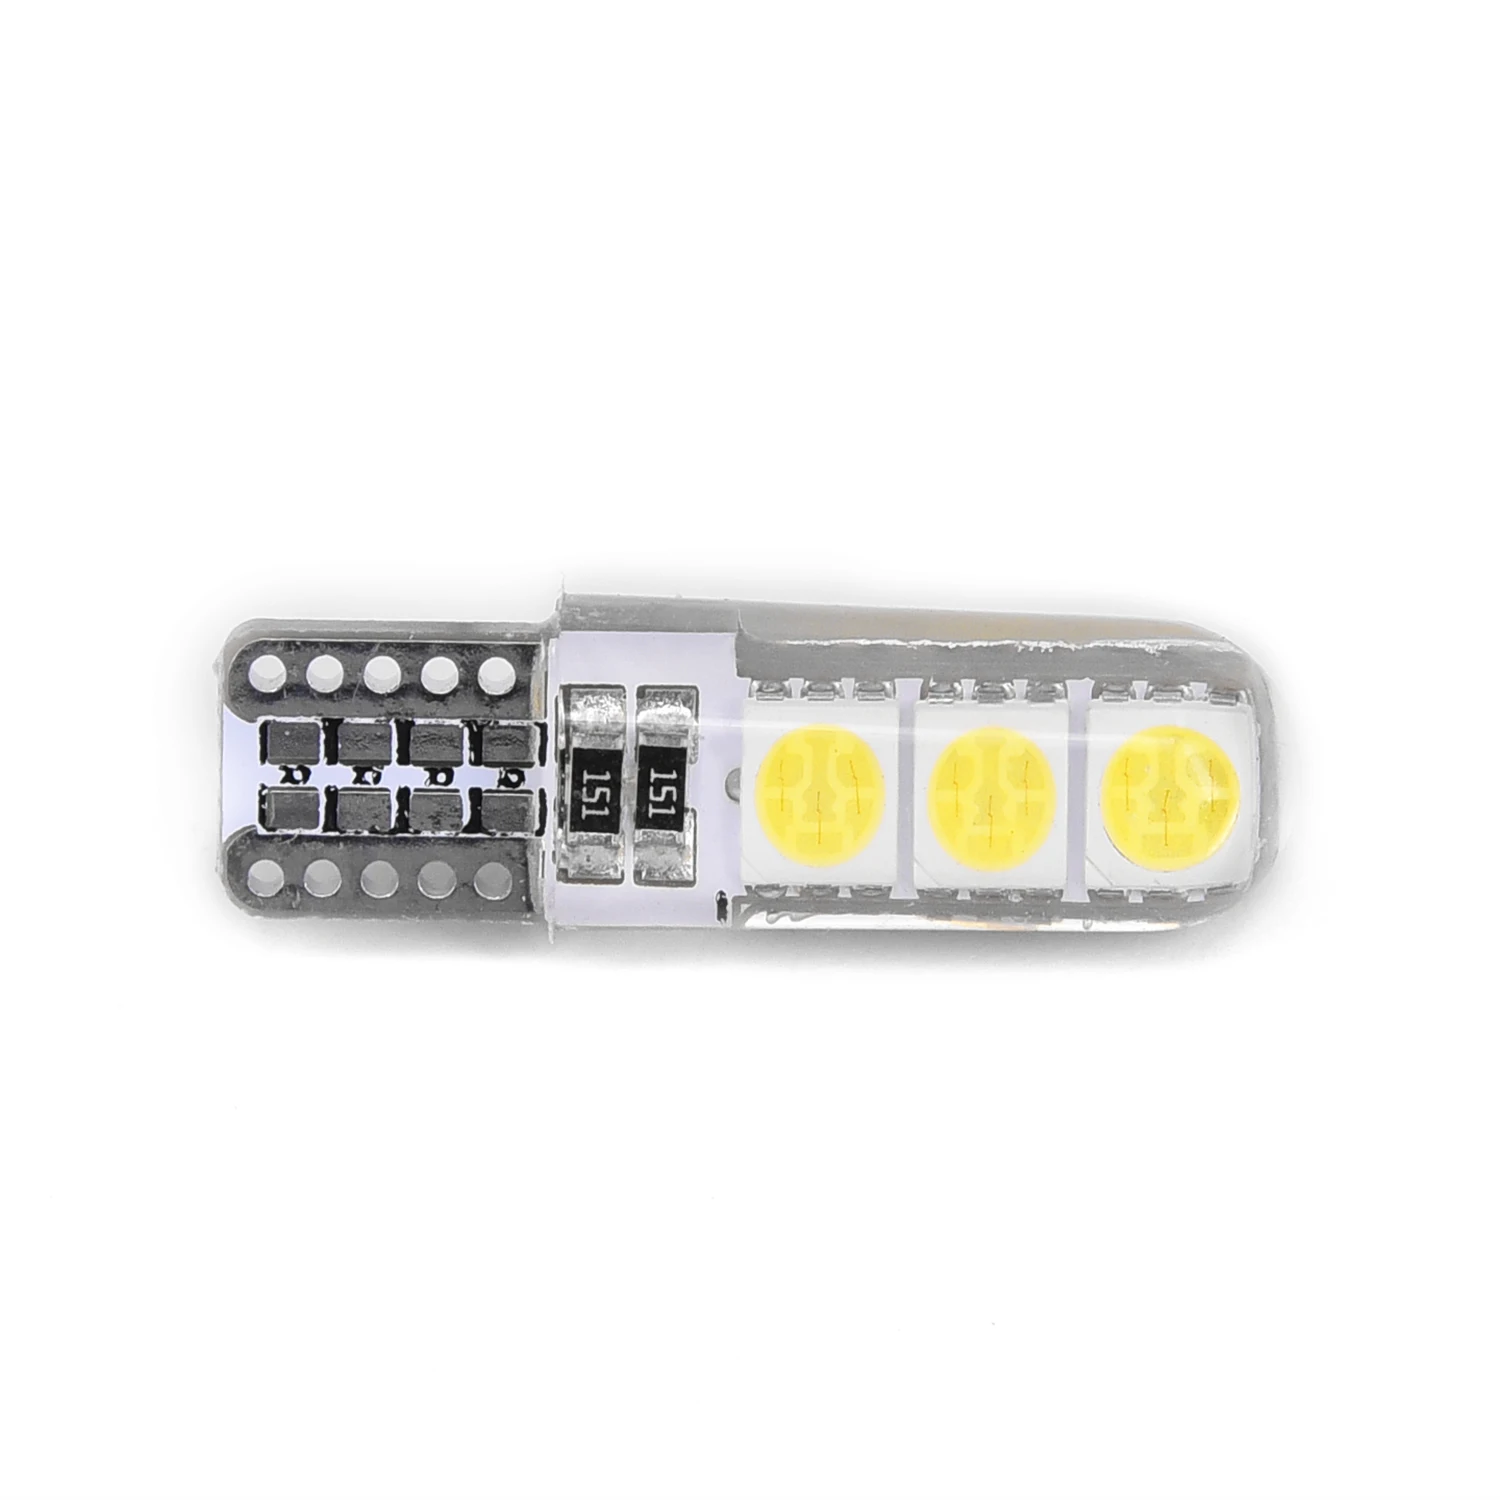 

Silicone Shell Canbus LED Lamp White 12V DC License Plate Dome 10pcs T10 194 W5W Car T10-5050-6SMD Energy Saving